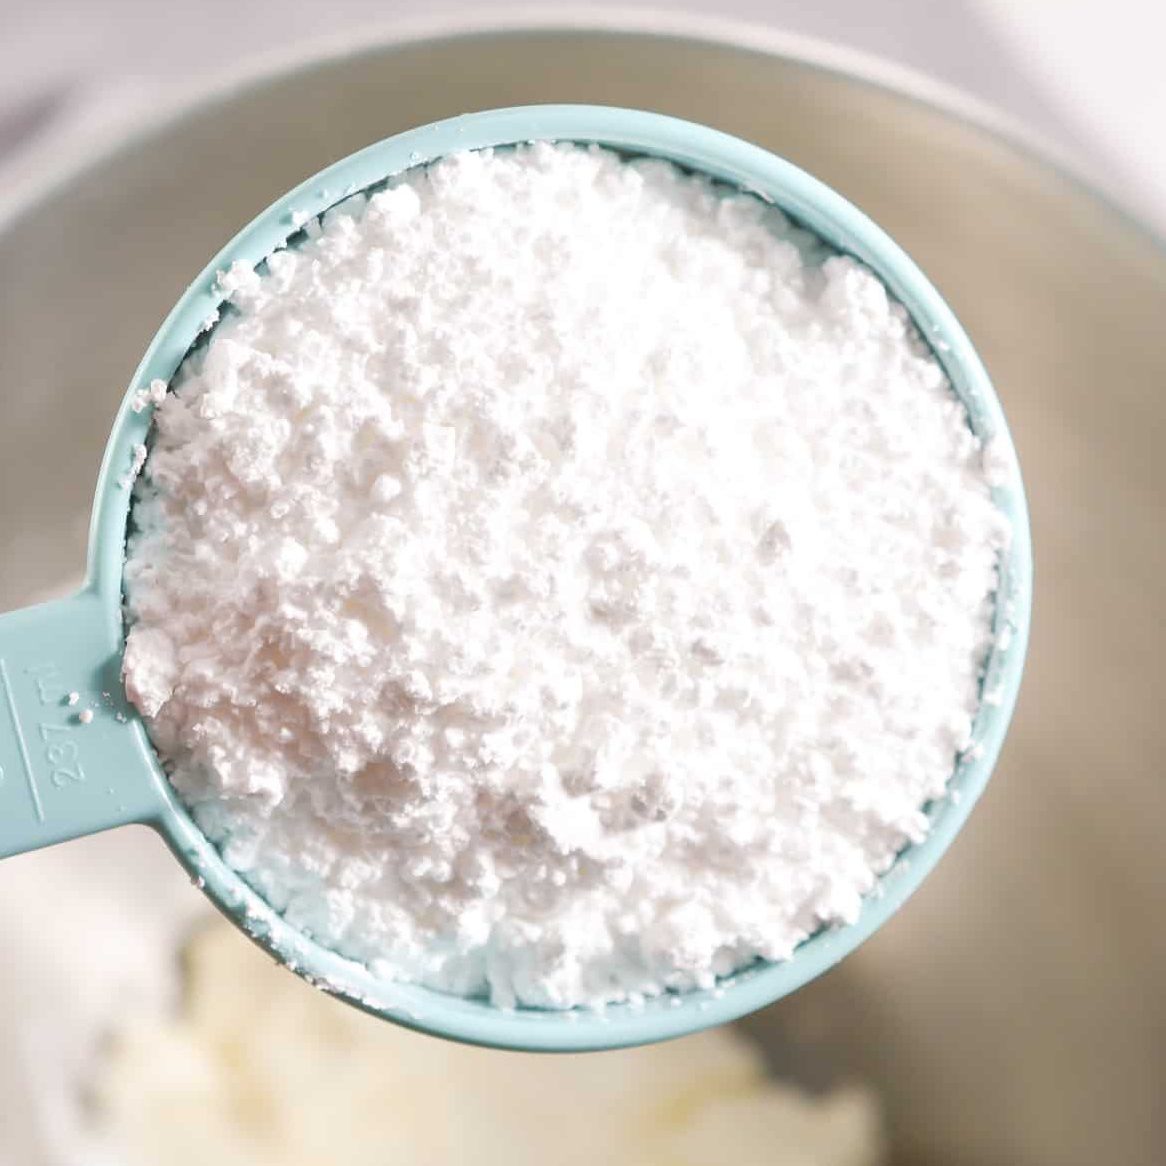 In a mixing bowl, beat together the cream cheese and powdered sugar until smooth.